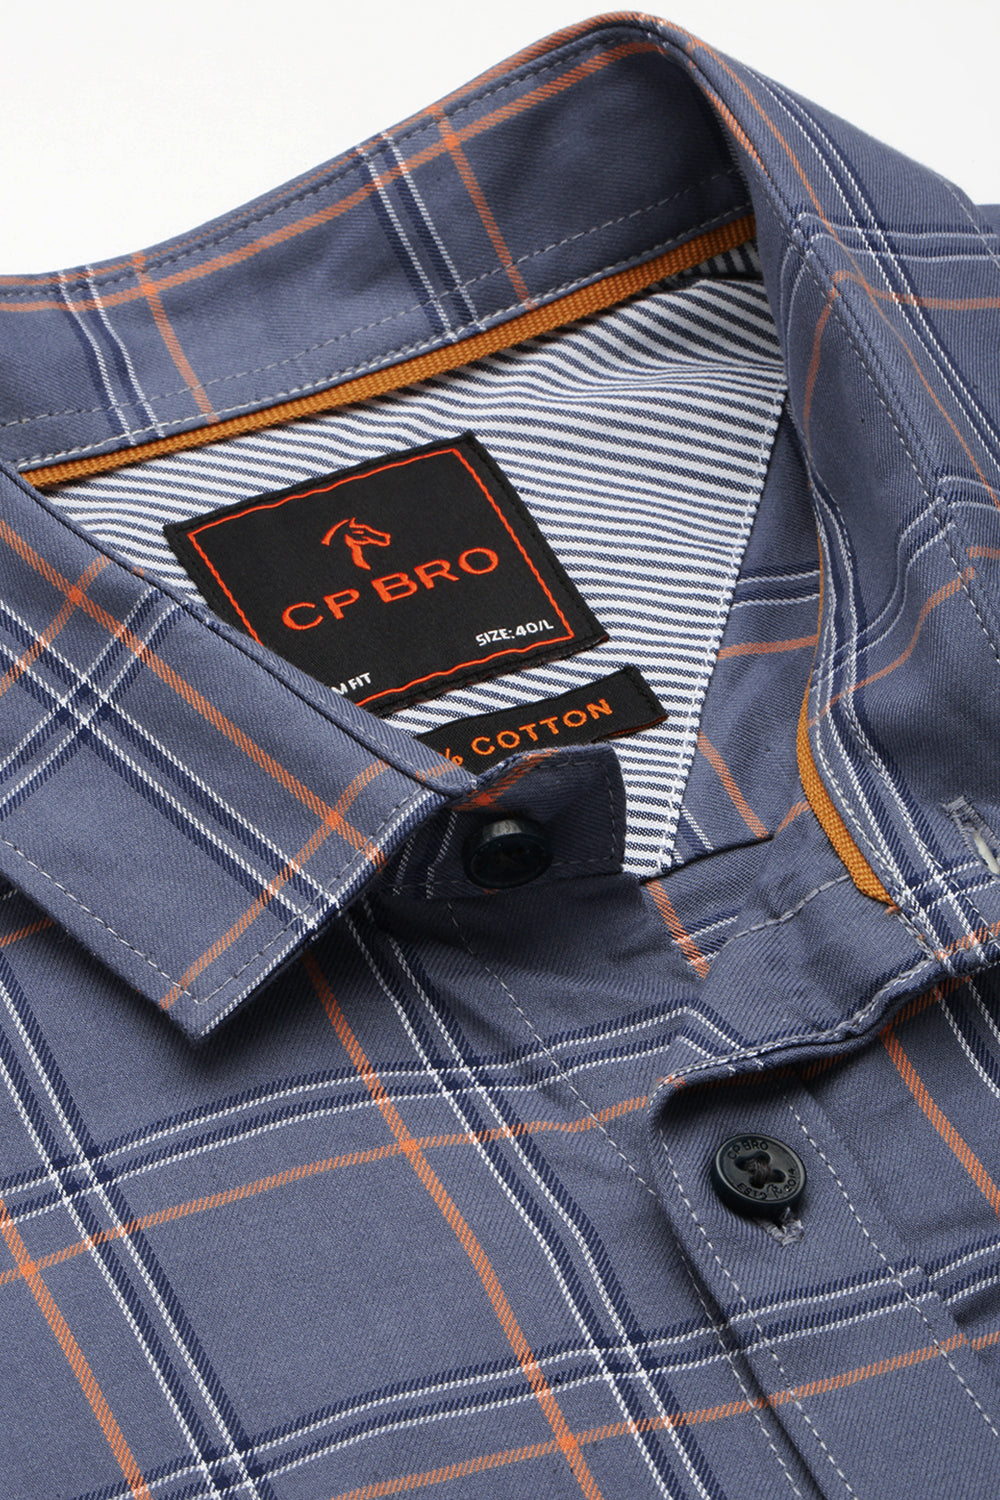 CP BRO Men's Cotton Full Sleeve Checked Slim Fit Polo Neck Blue Color Woven Shirt | Sbo1-27 B